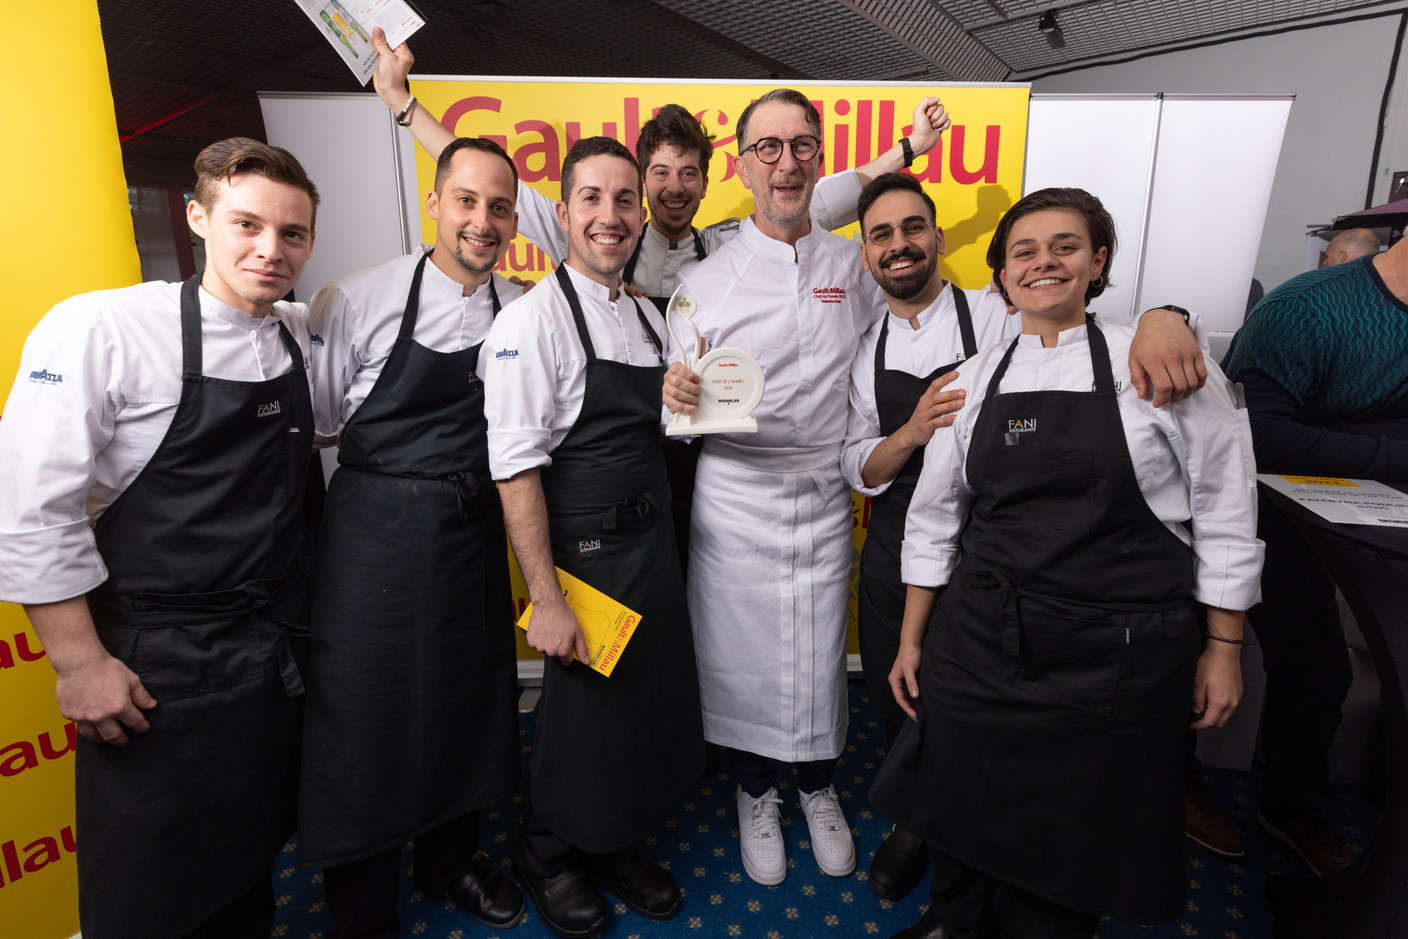 Chef of the year Roberto Fani with his kitchen team (Photo: Guy Wolff/Maison Moderne)